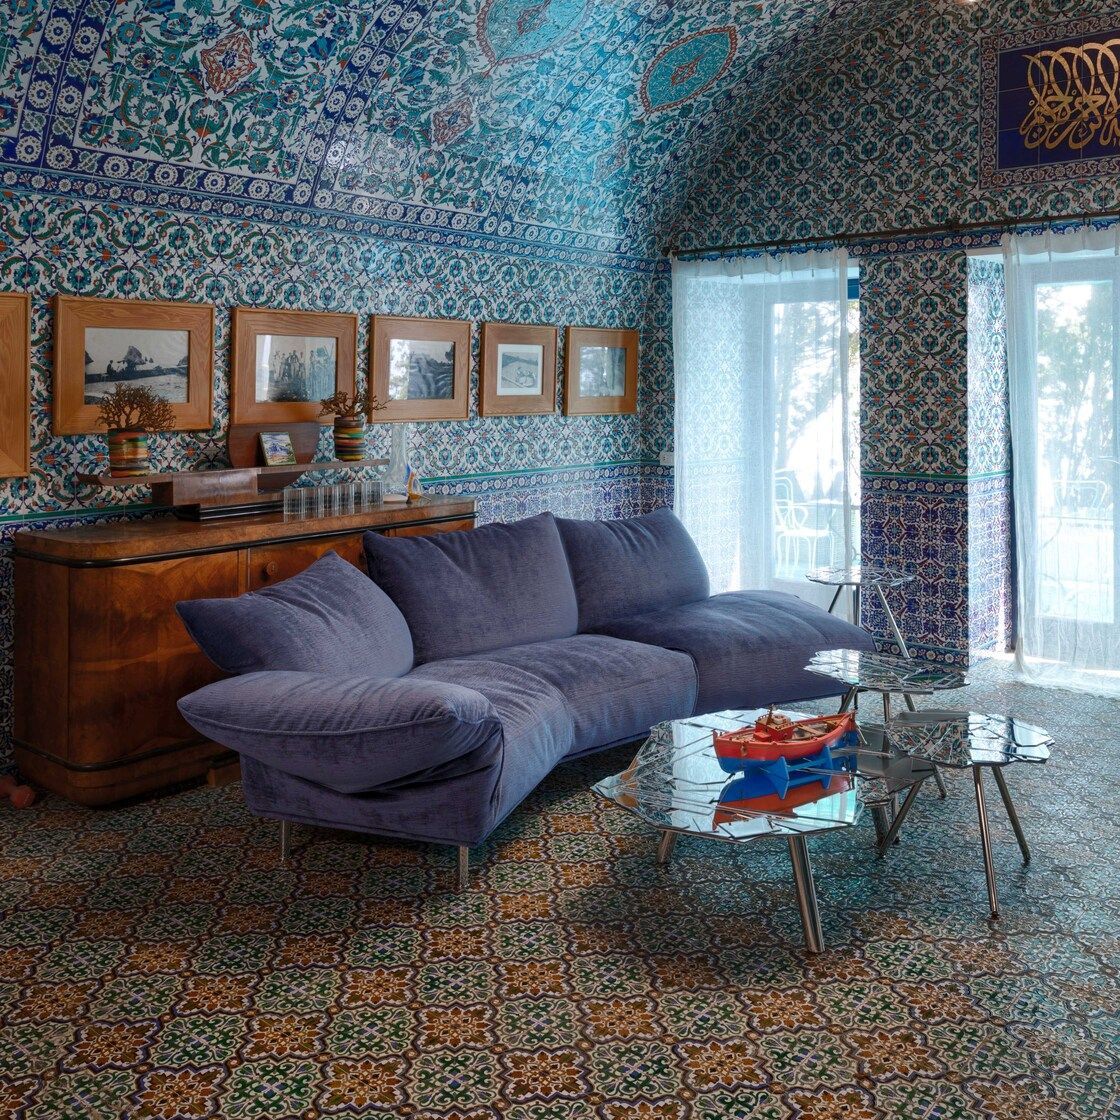   Standalto  e  Brasilia . The sofa by Francesco Binfaré and the mirrored coffee tables by the Campana brothers in one of the rooms of the central villa of Li Galli: a vaulted room entirely covered with Ottoman majolica, commissioned by Rudolf Nureyev. 